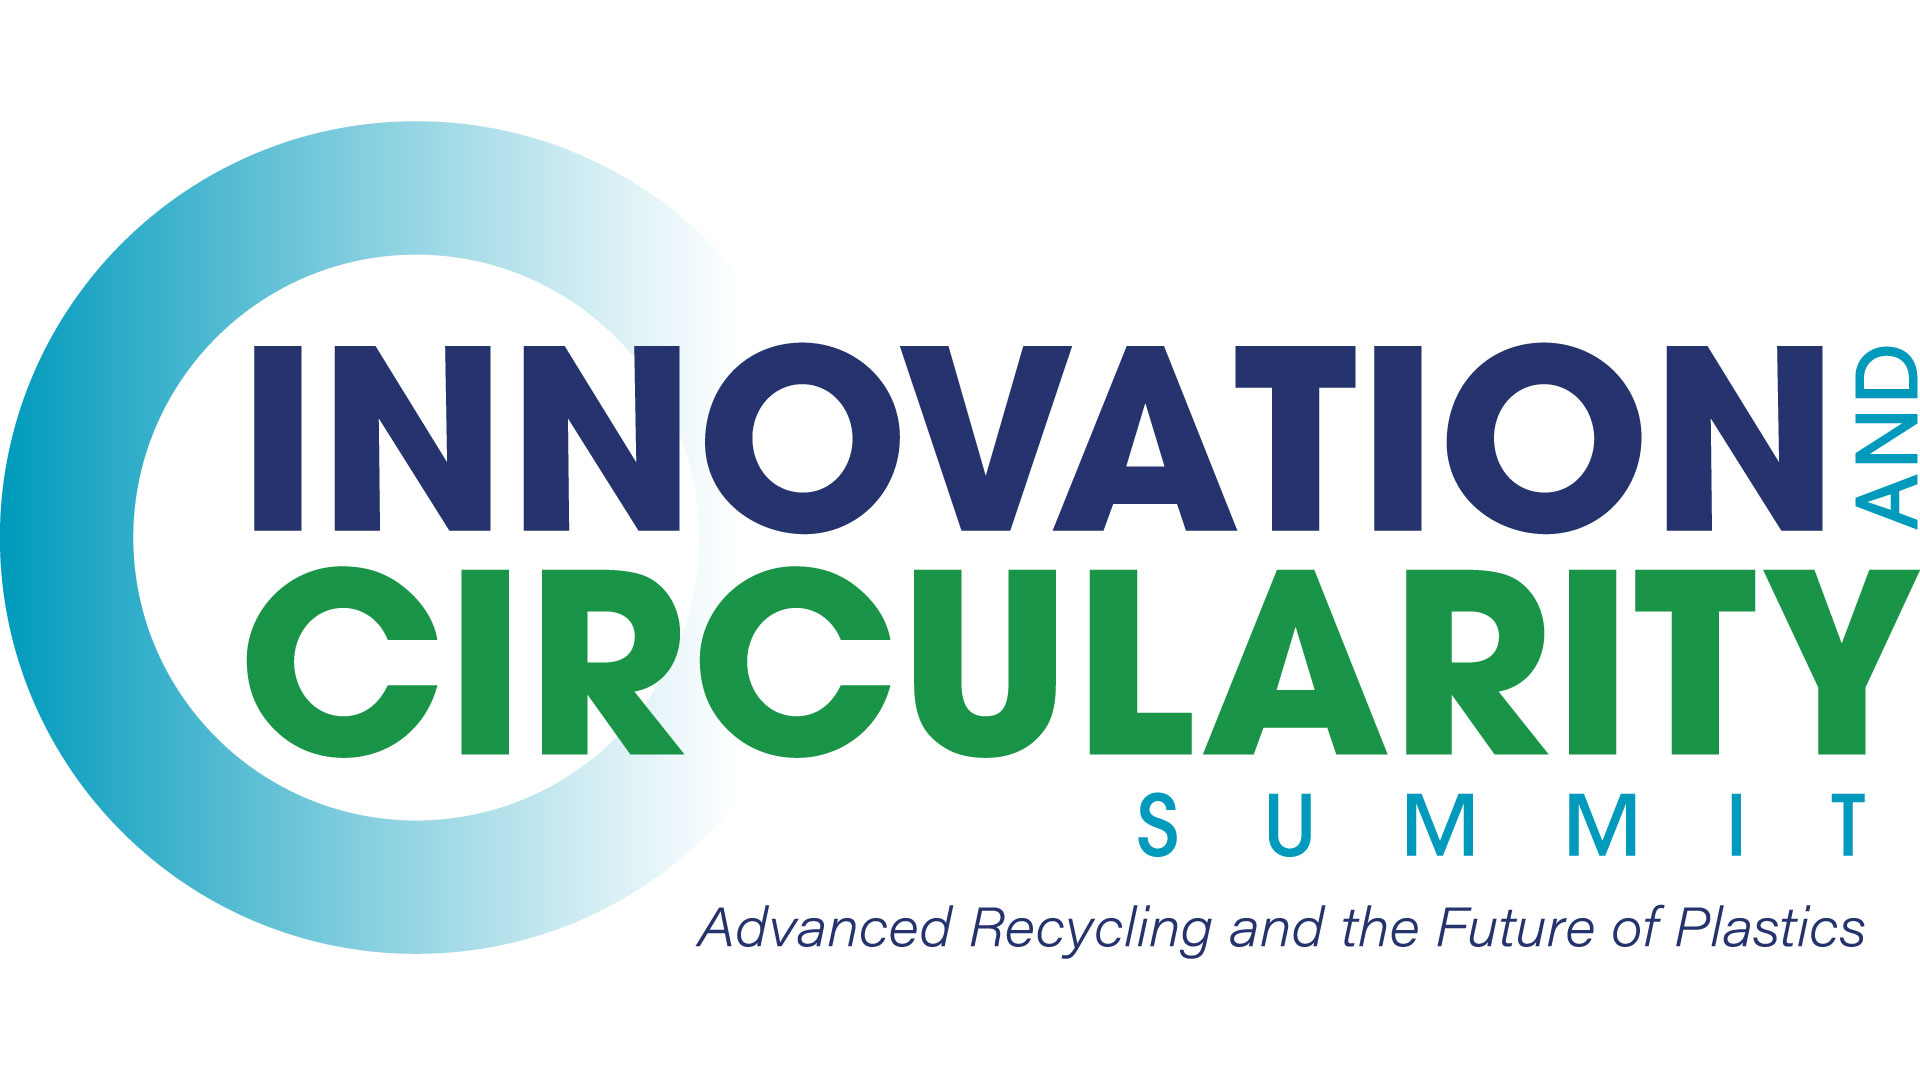 Innovation and Circularity Summit - ACC